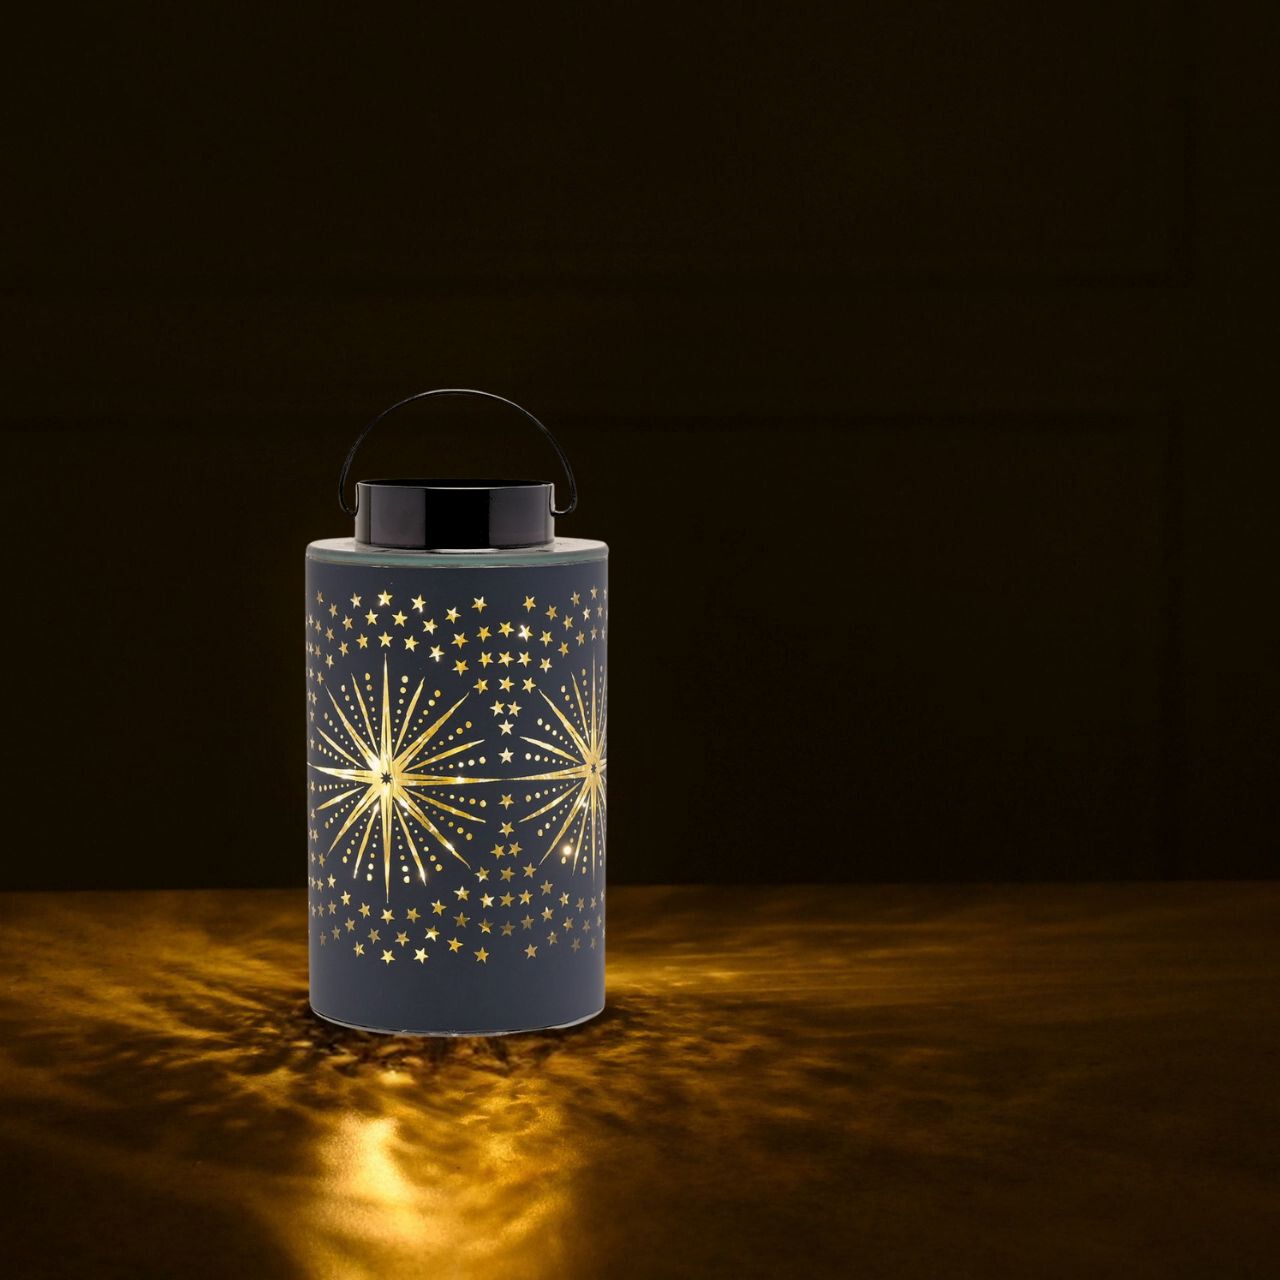 This celestial lantern takes inspiration from the stars when displayed at Christmas time.  The decorative glass lantern showcases a distinctive cut out star design, blue colouring, and complementary handle. Its LED lights fill the lantern with glowing colour.